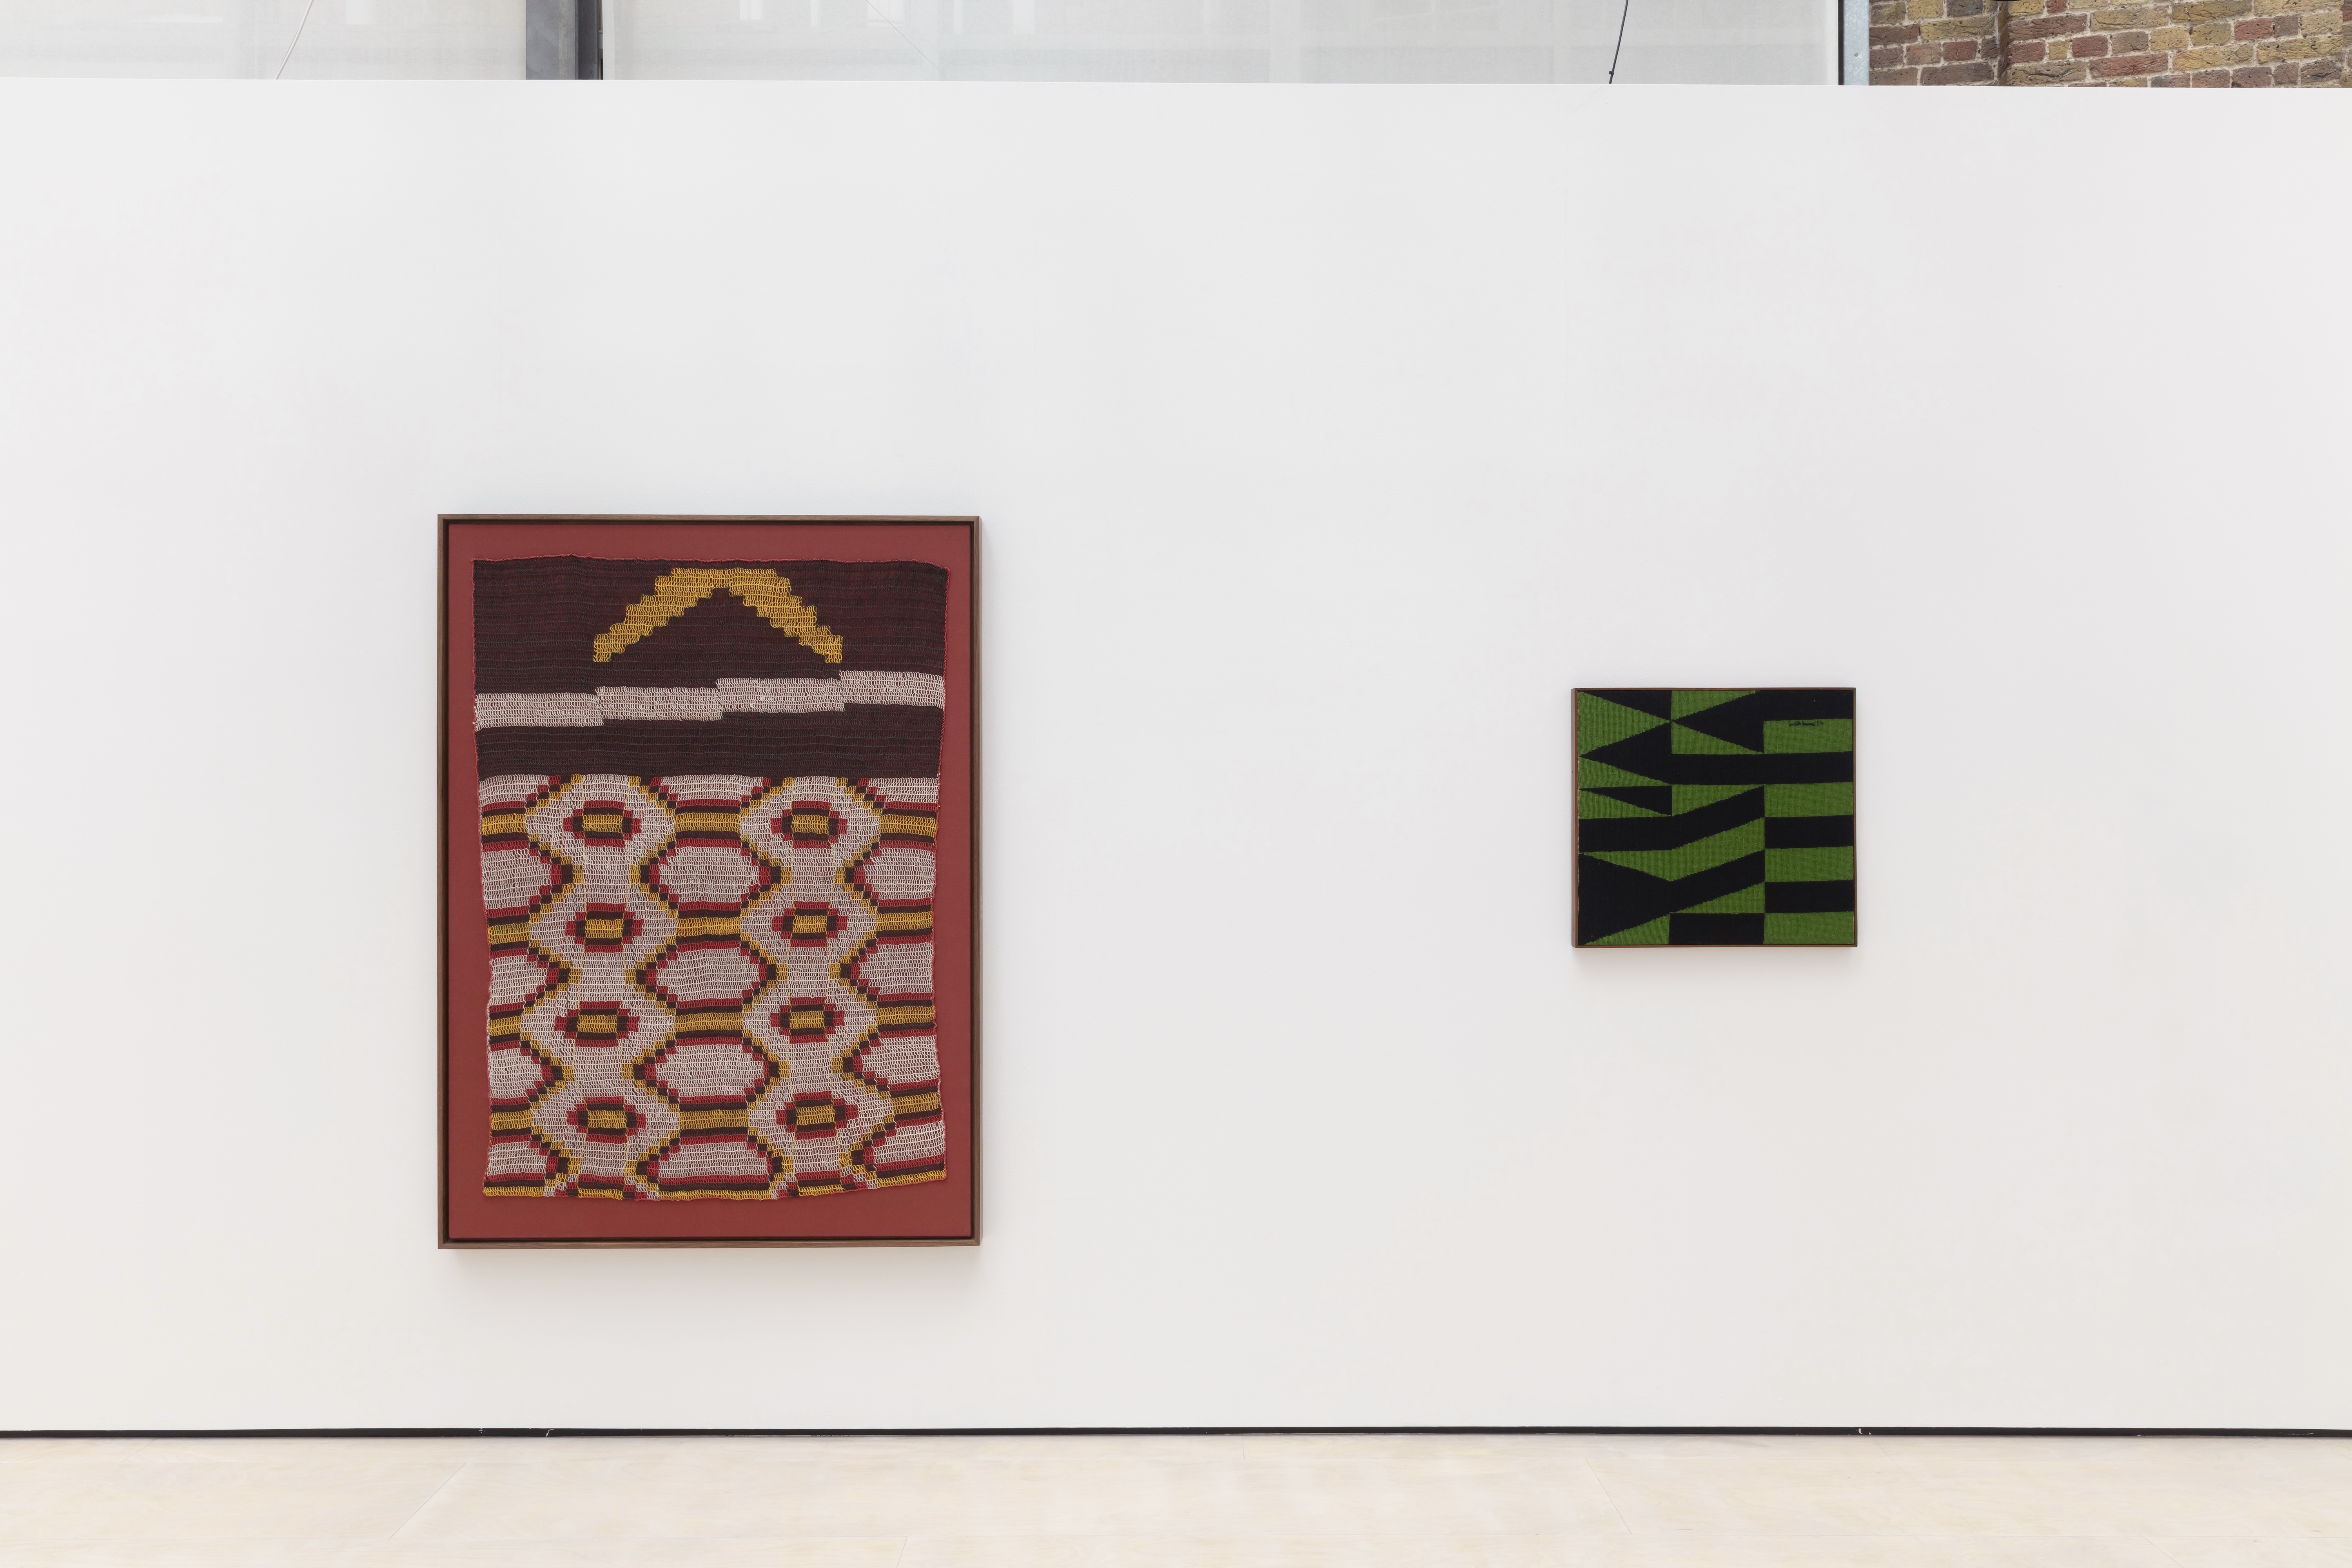 Works by Claudia Alarcón & Silát and Judith Lauand